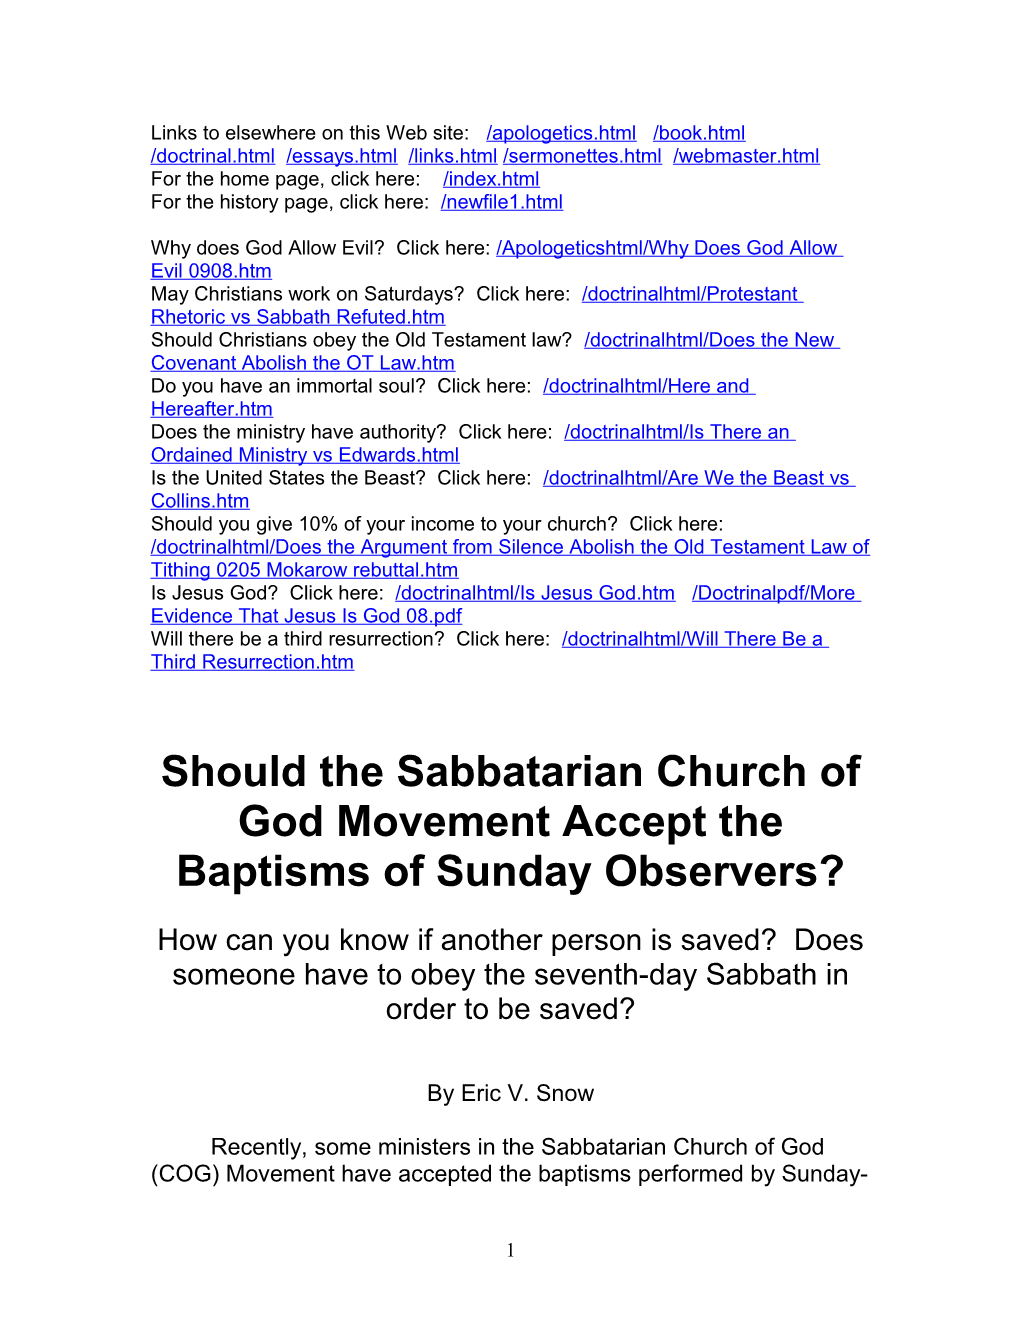 Should the Sabbatarian Church of God Movement Accept the Baptisms of Sunday Observers